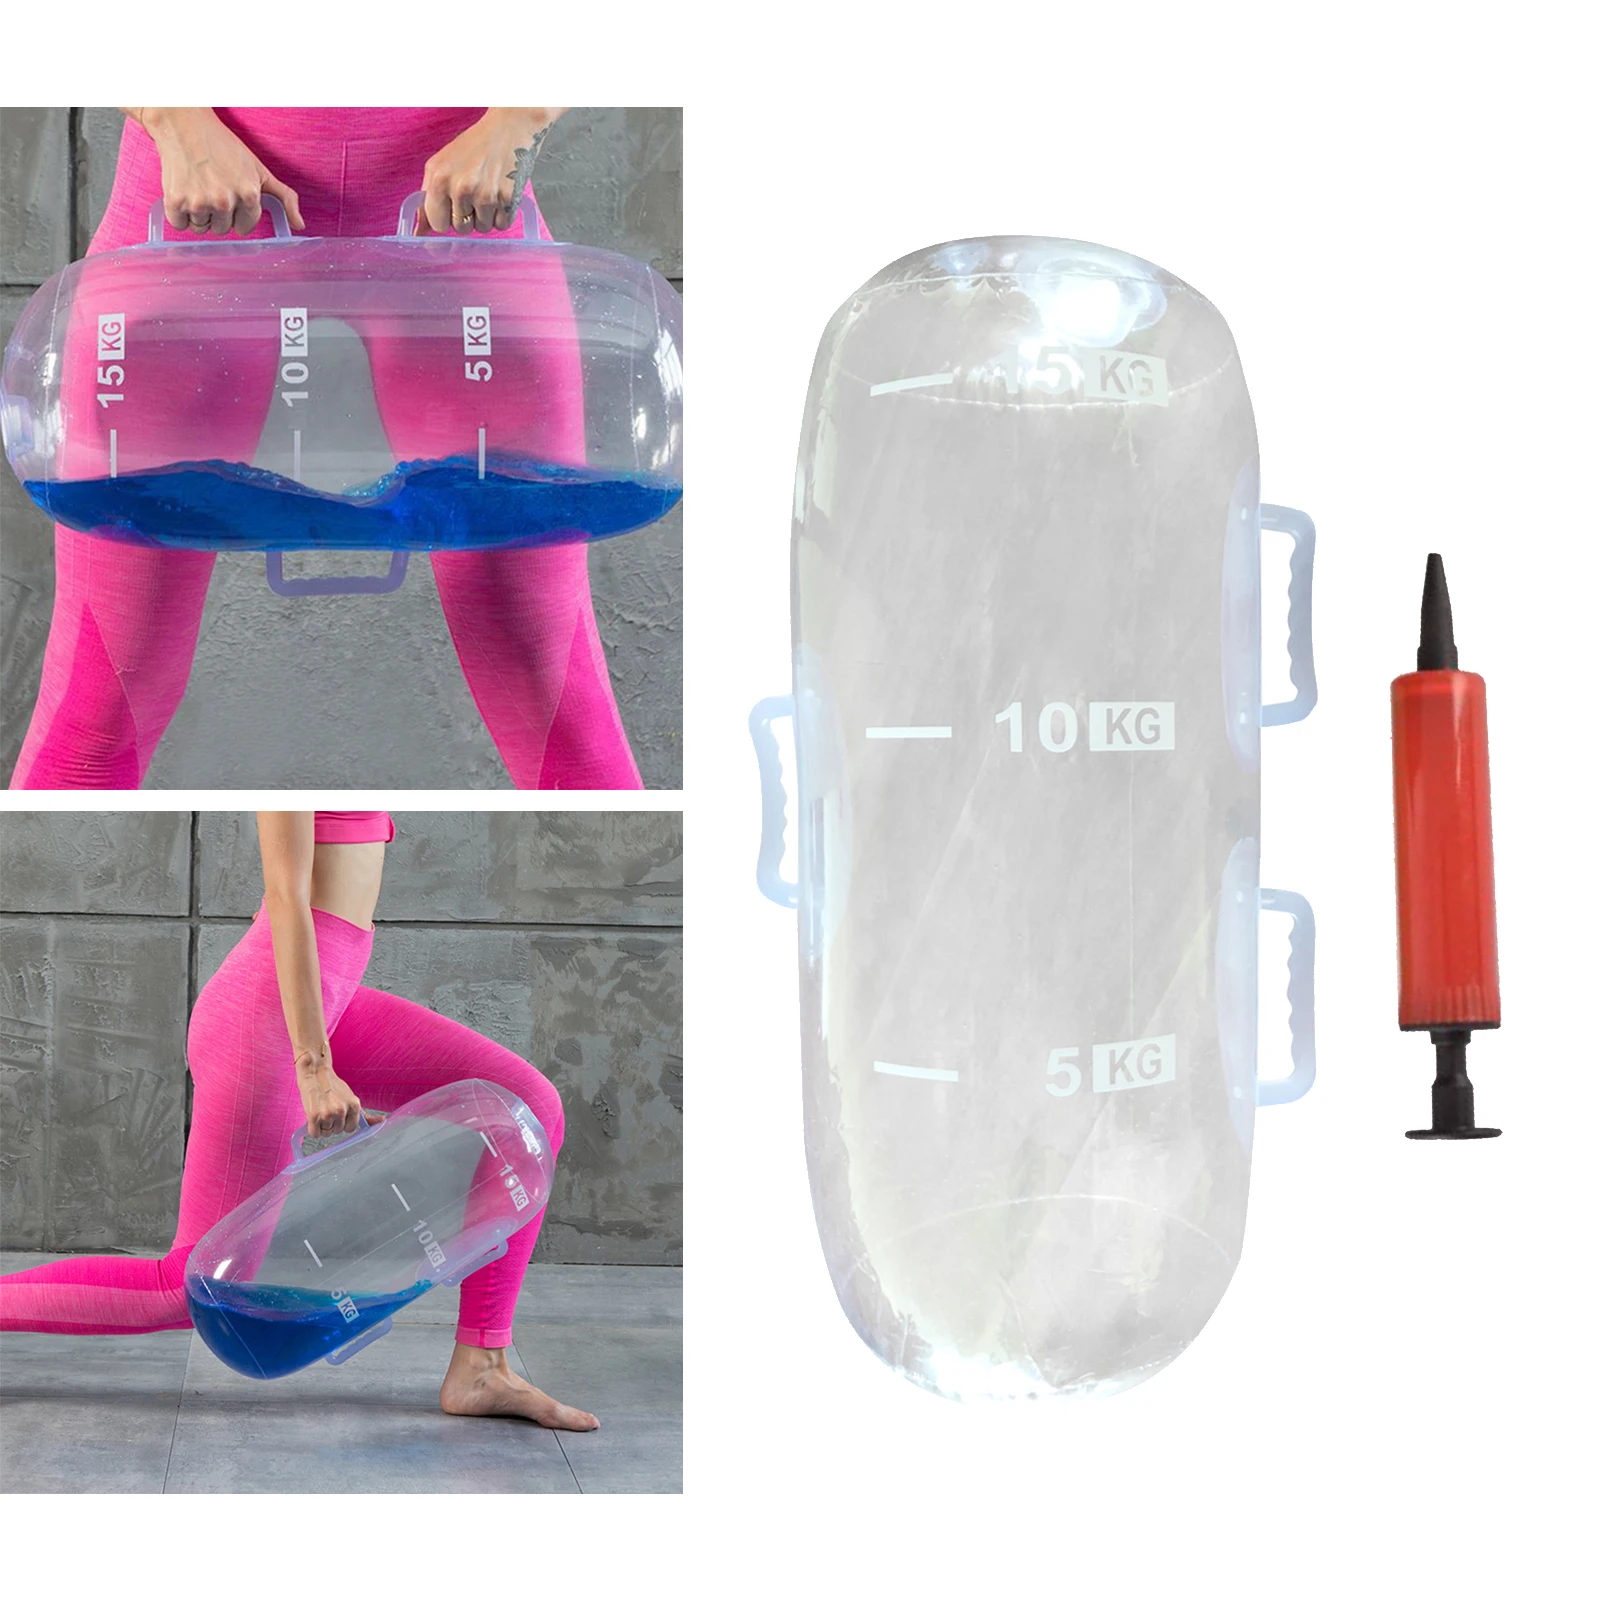 Training Power Bag Portable Stability Fitness Equipment Agility Water Waterbag for Full Body Sandbag Indoors